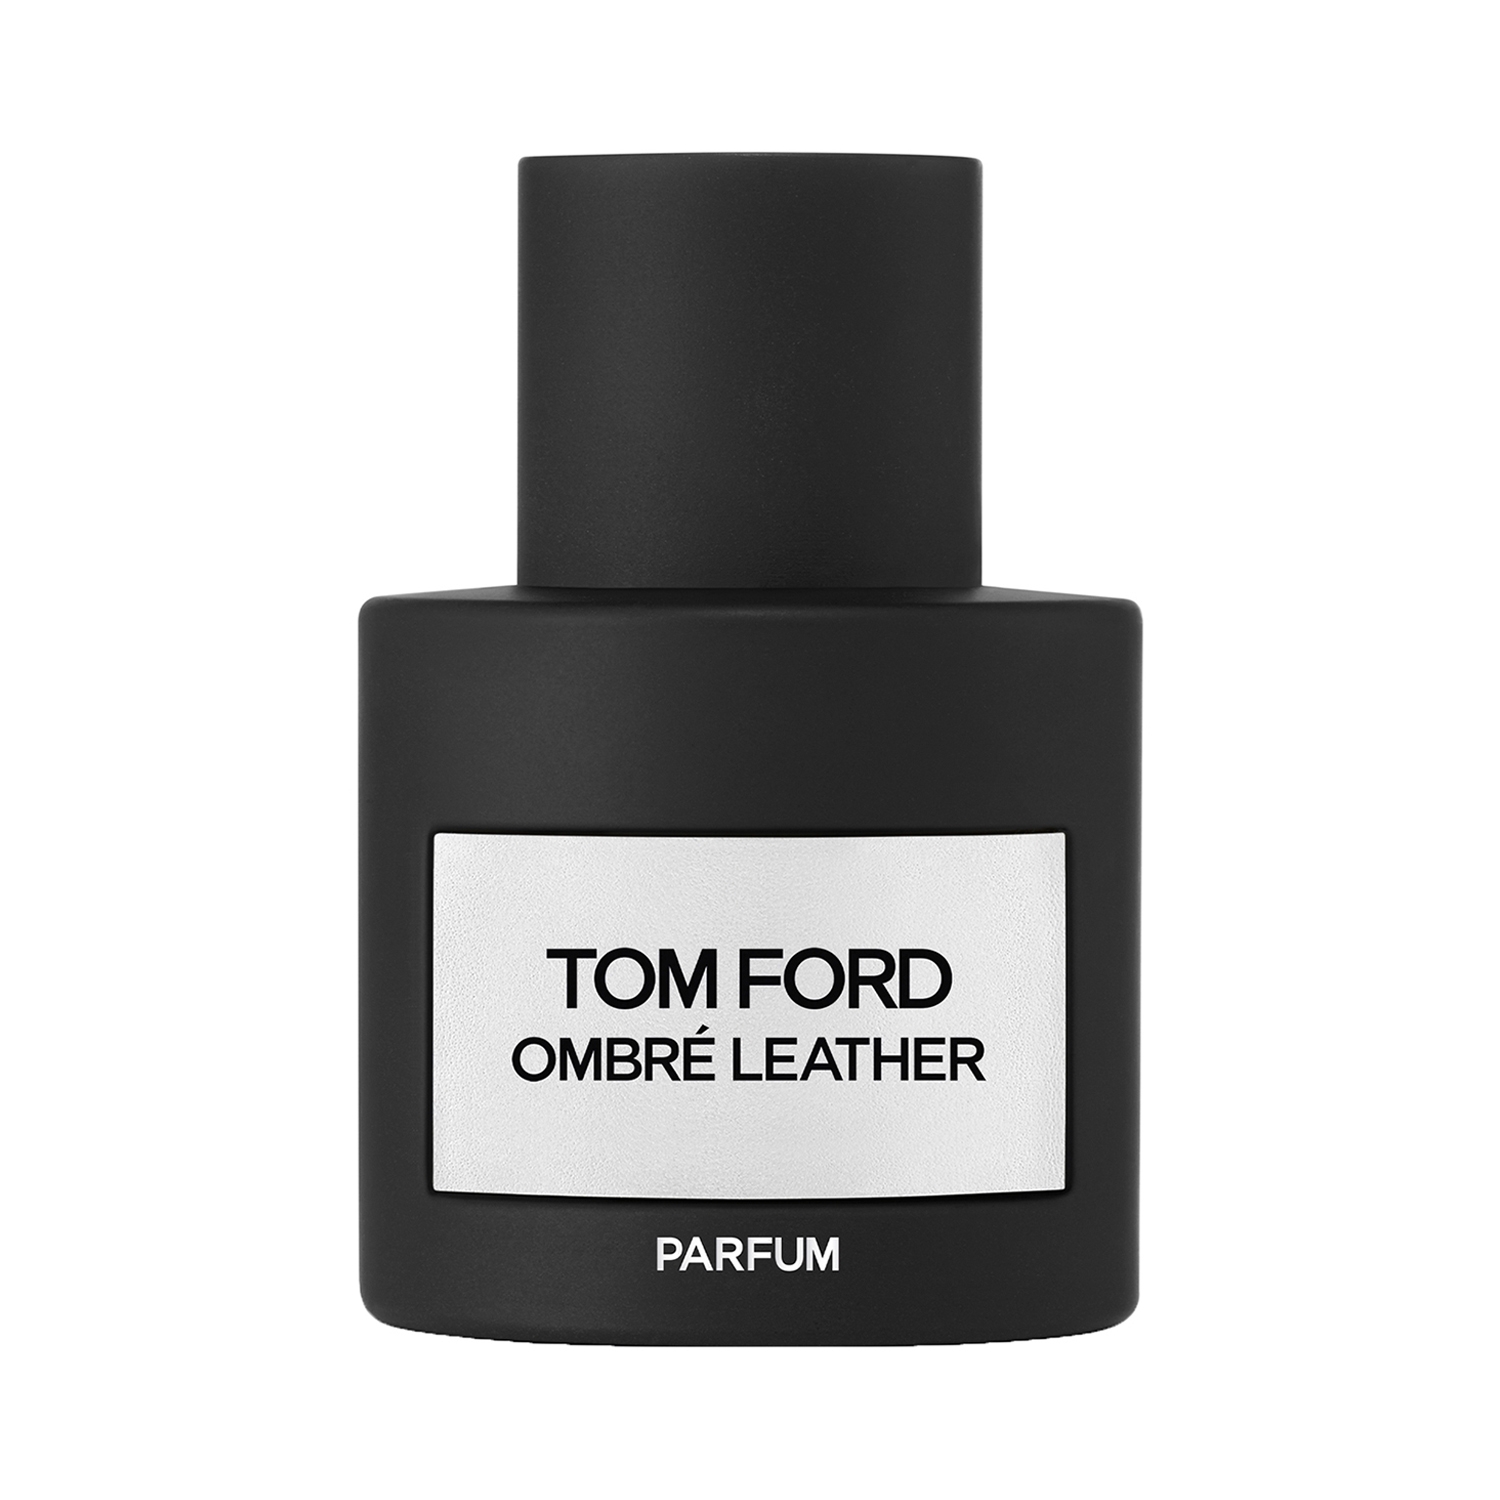 Buy Tom Ford Ombre Leather Parfum (50ml) - Tom Ford | Tira: Shop Makeup ...